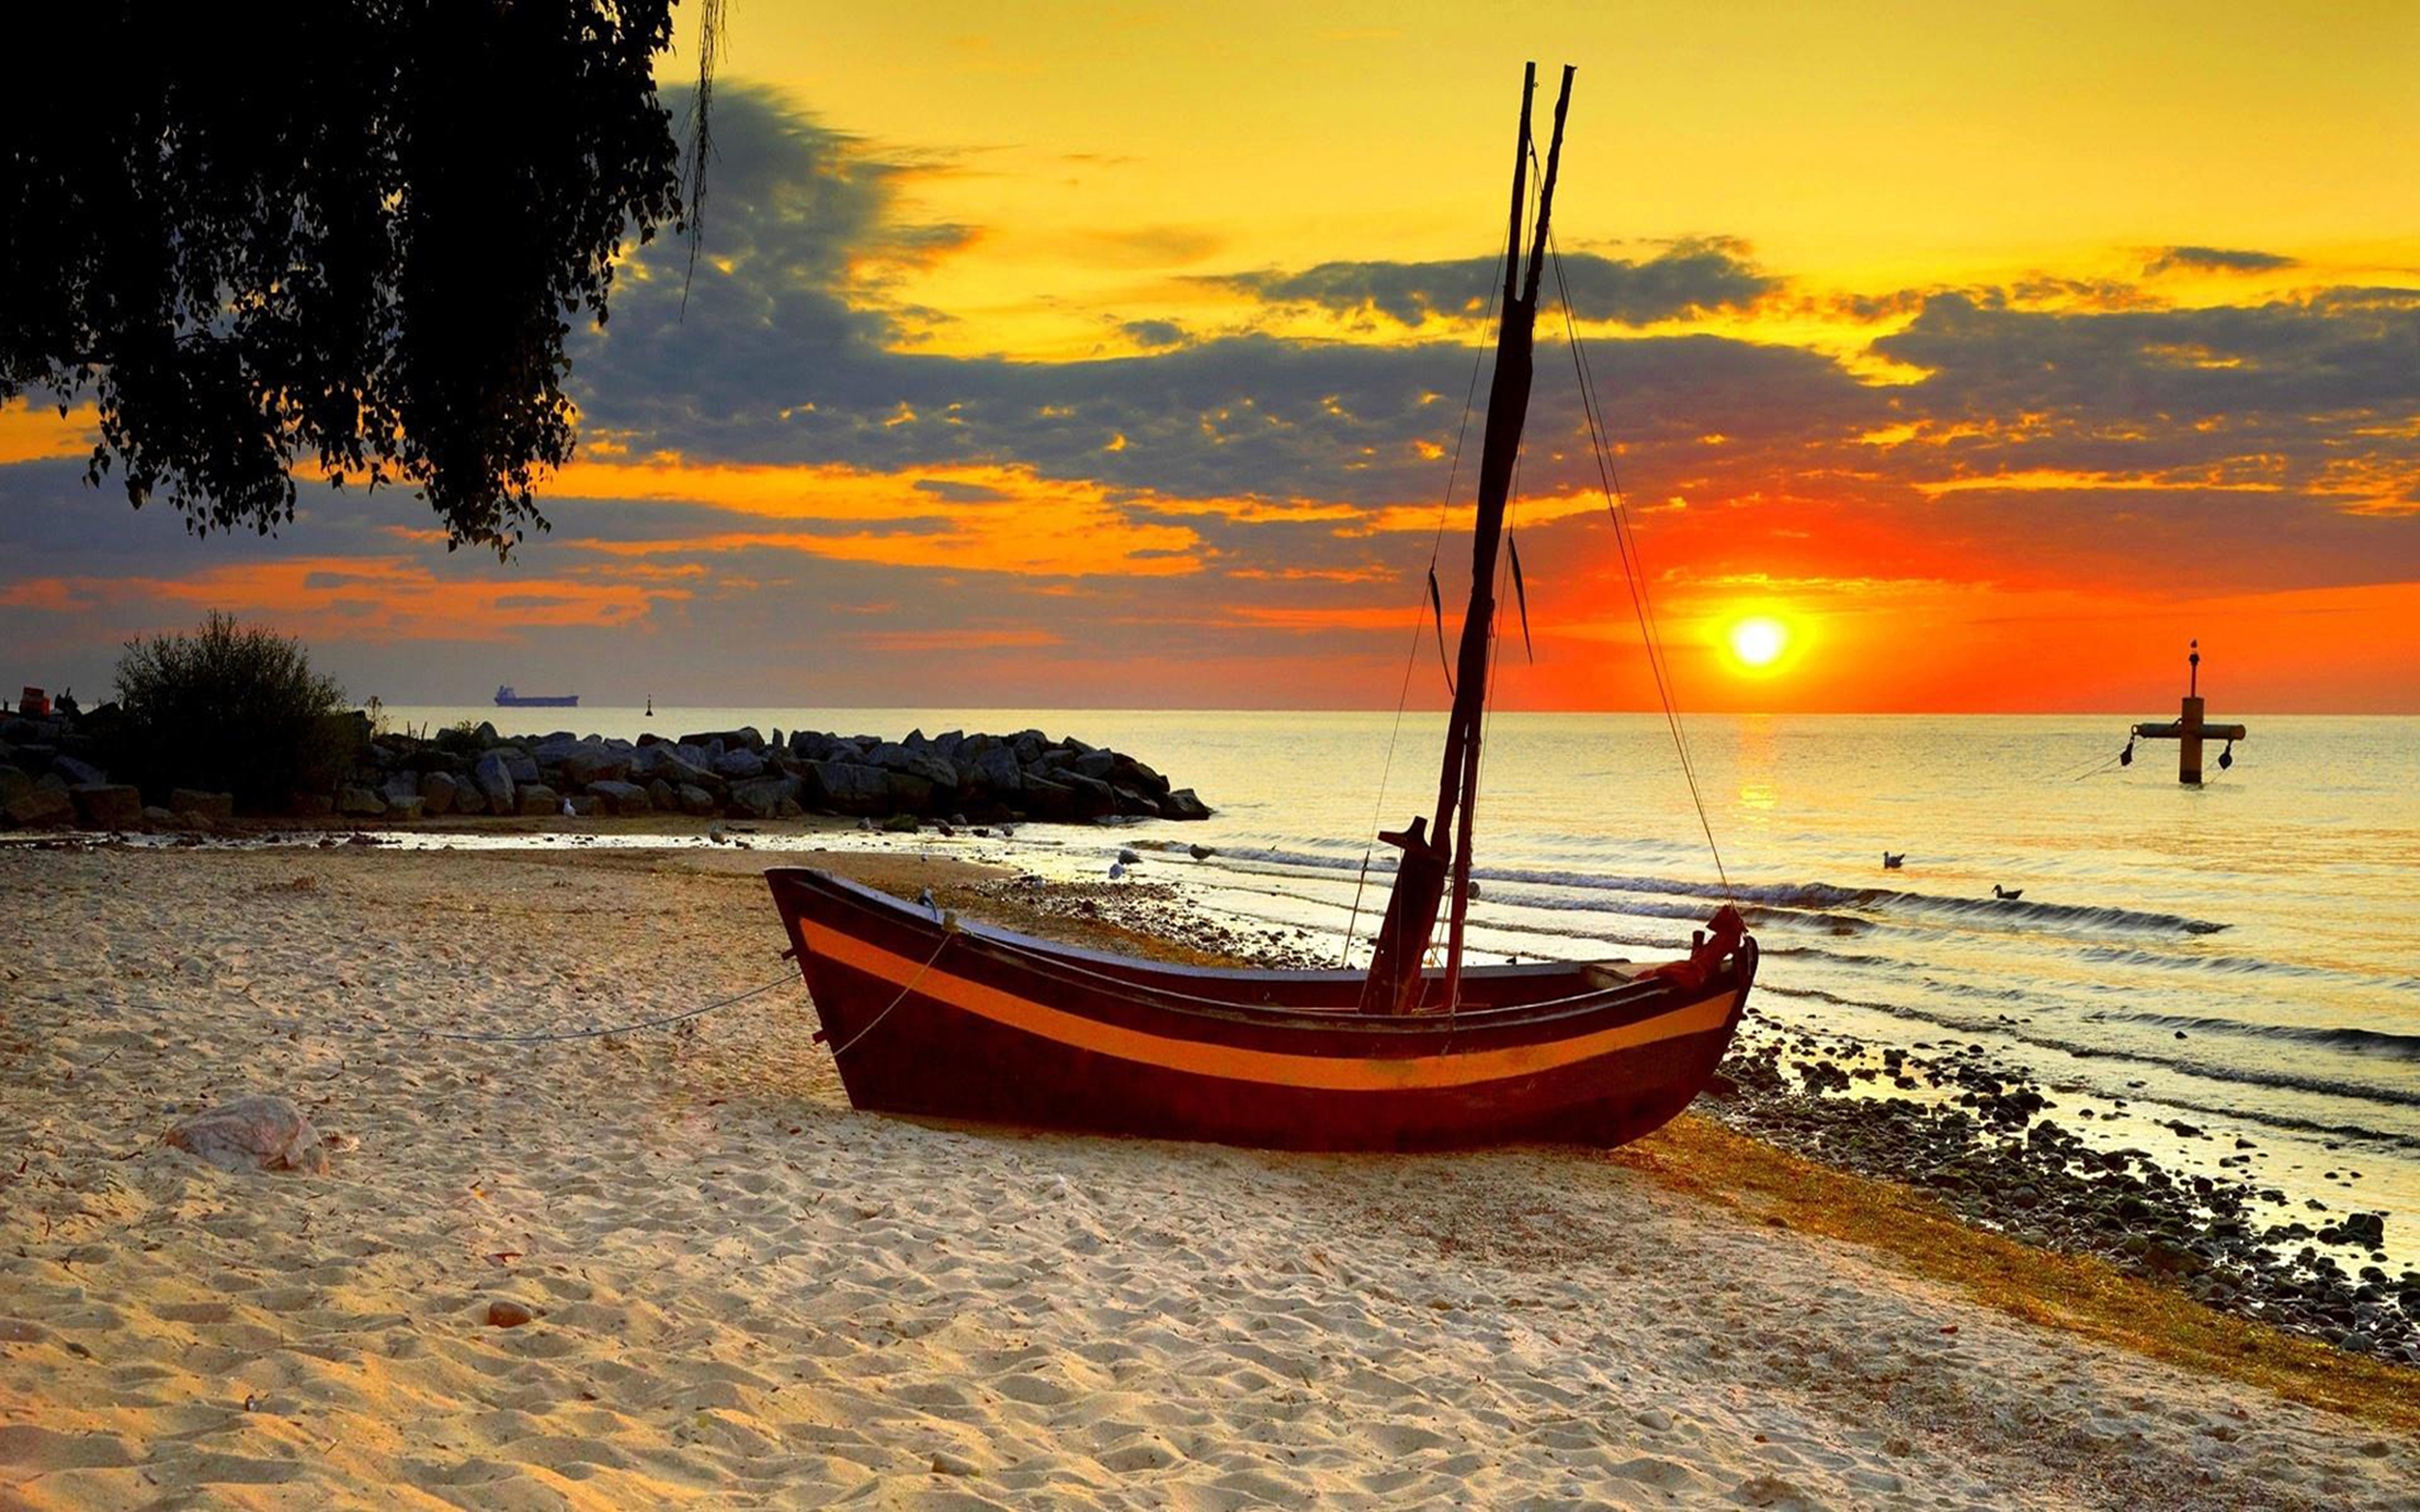 Little Sailboat On A Beach At Sunset : Wallpapers13.com